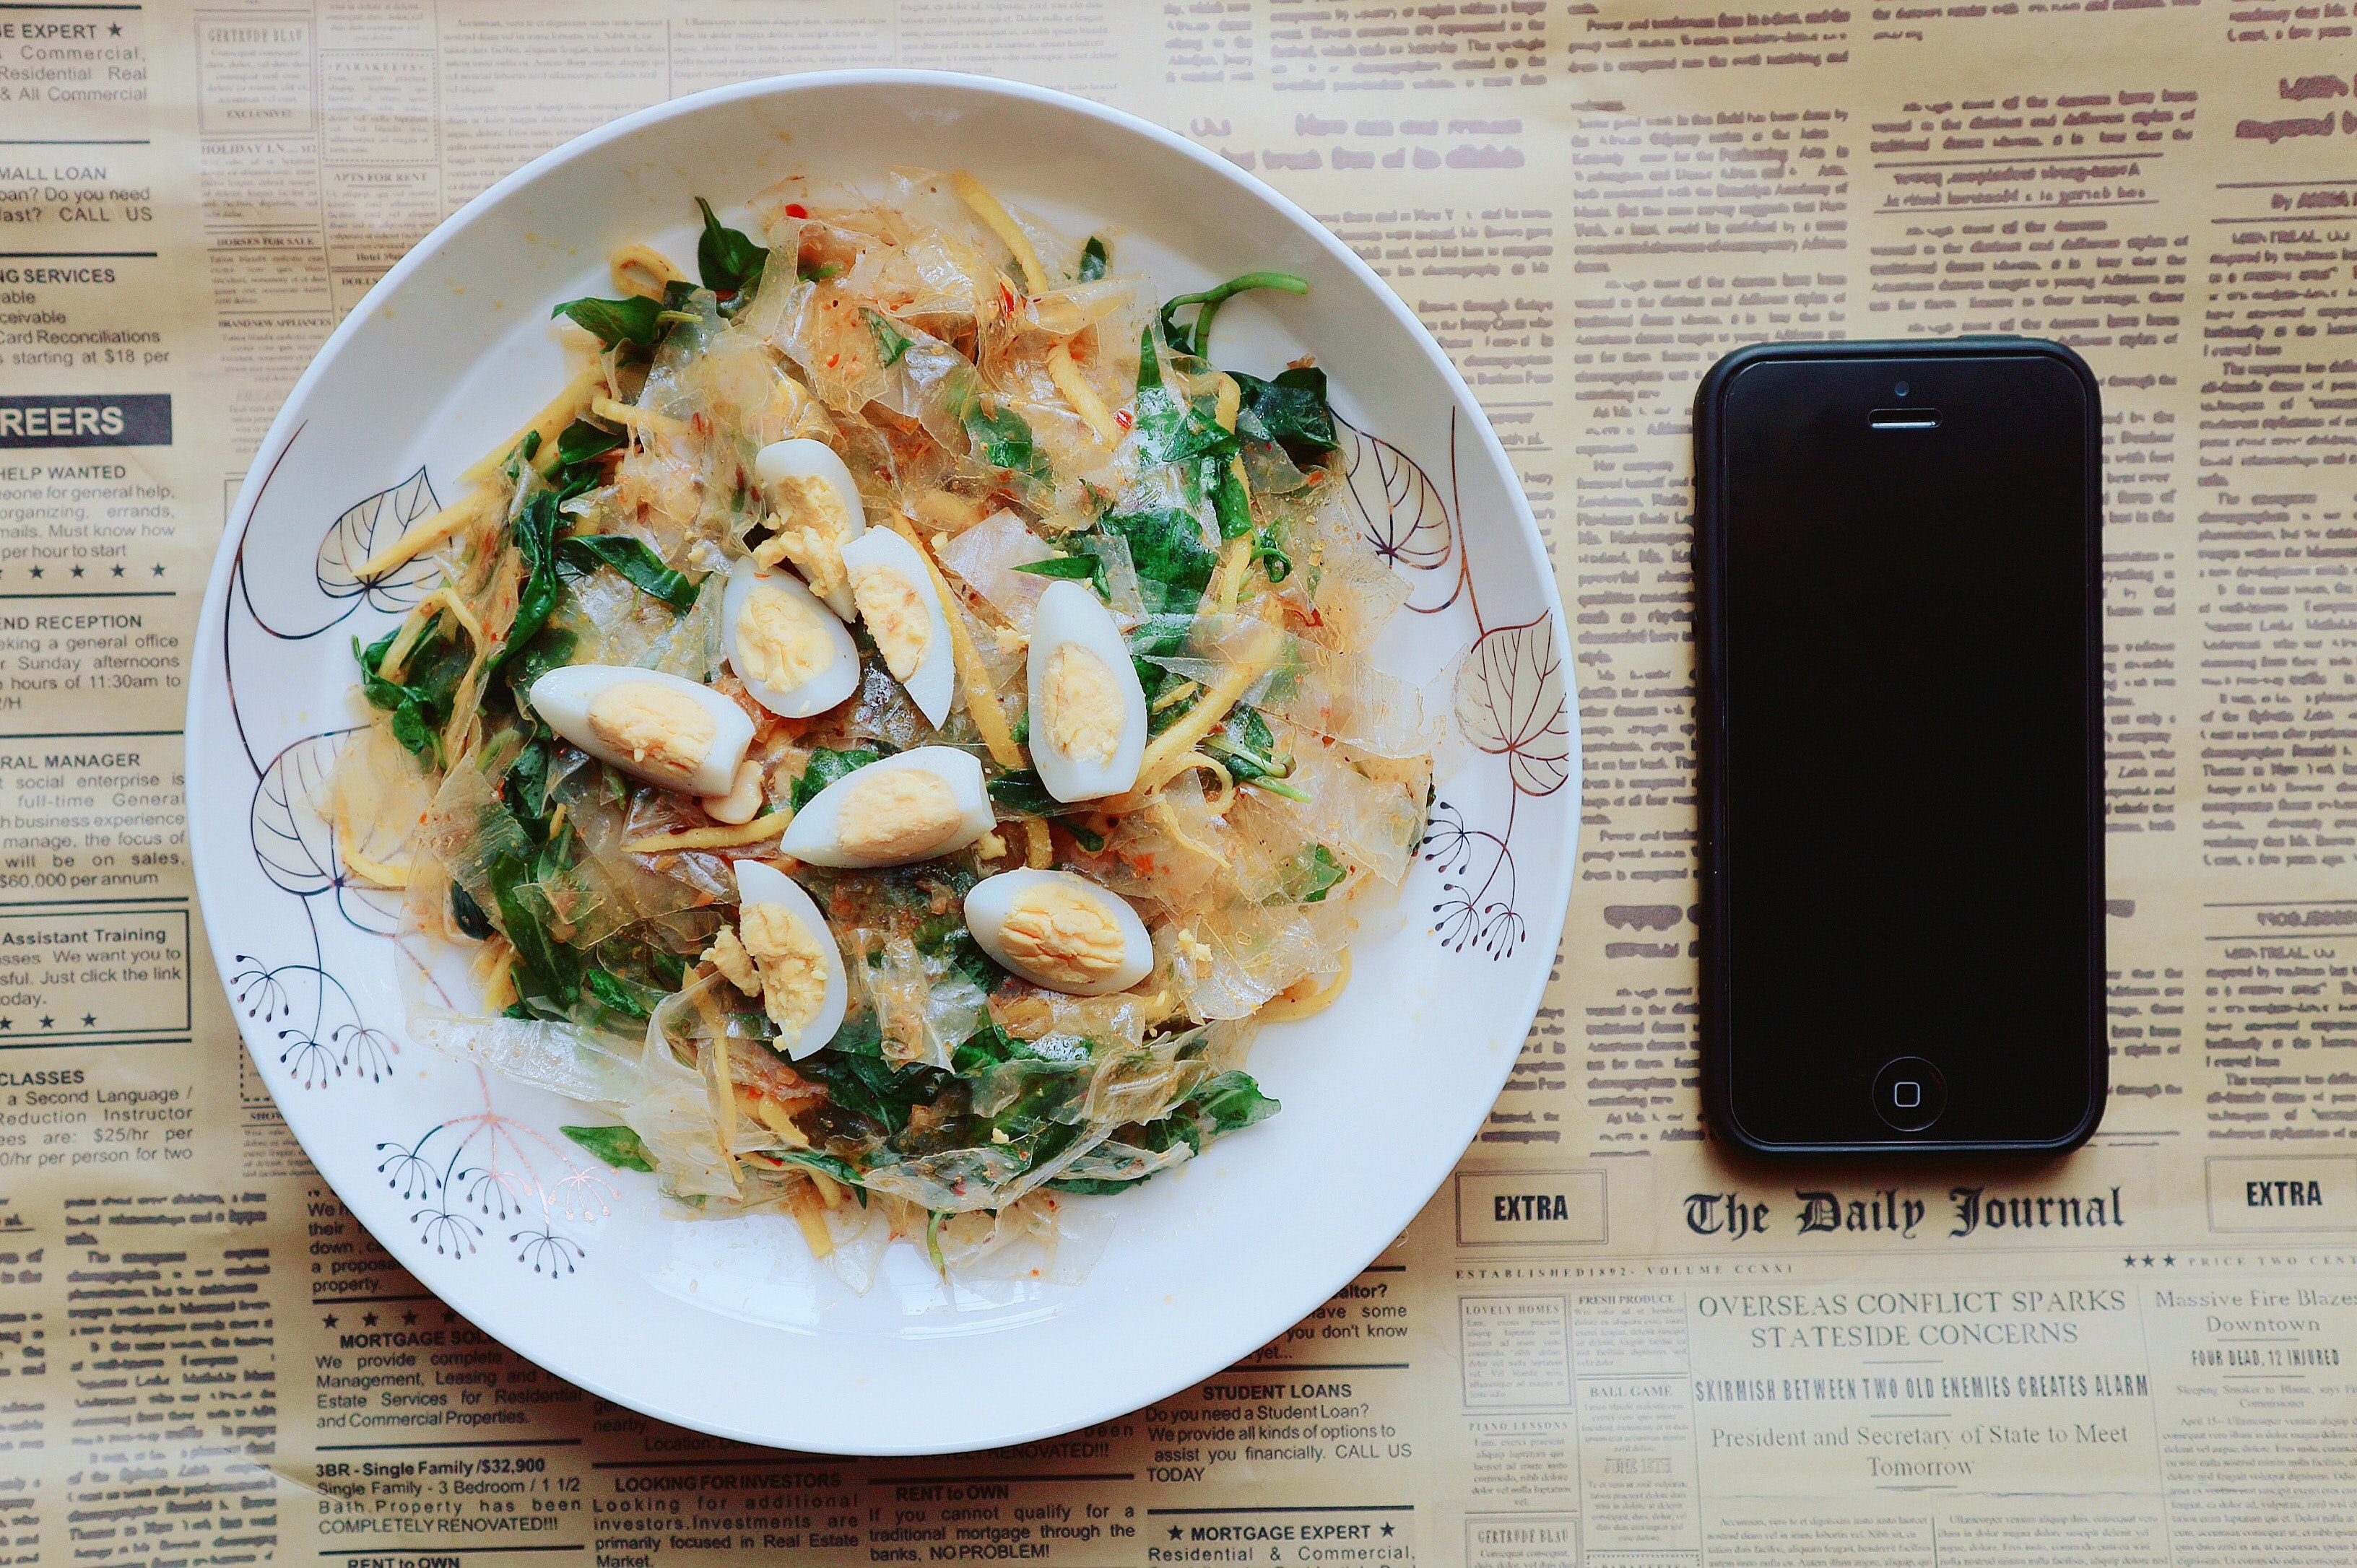 Black Iphone 5 Near Plate of Pasta Dish, Cooking, Newspaper, Vegetable, Traditional, HQ Photo